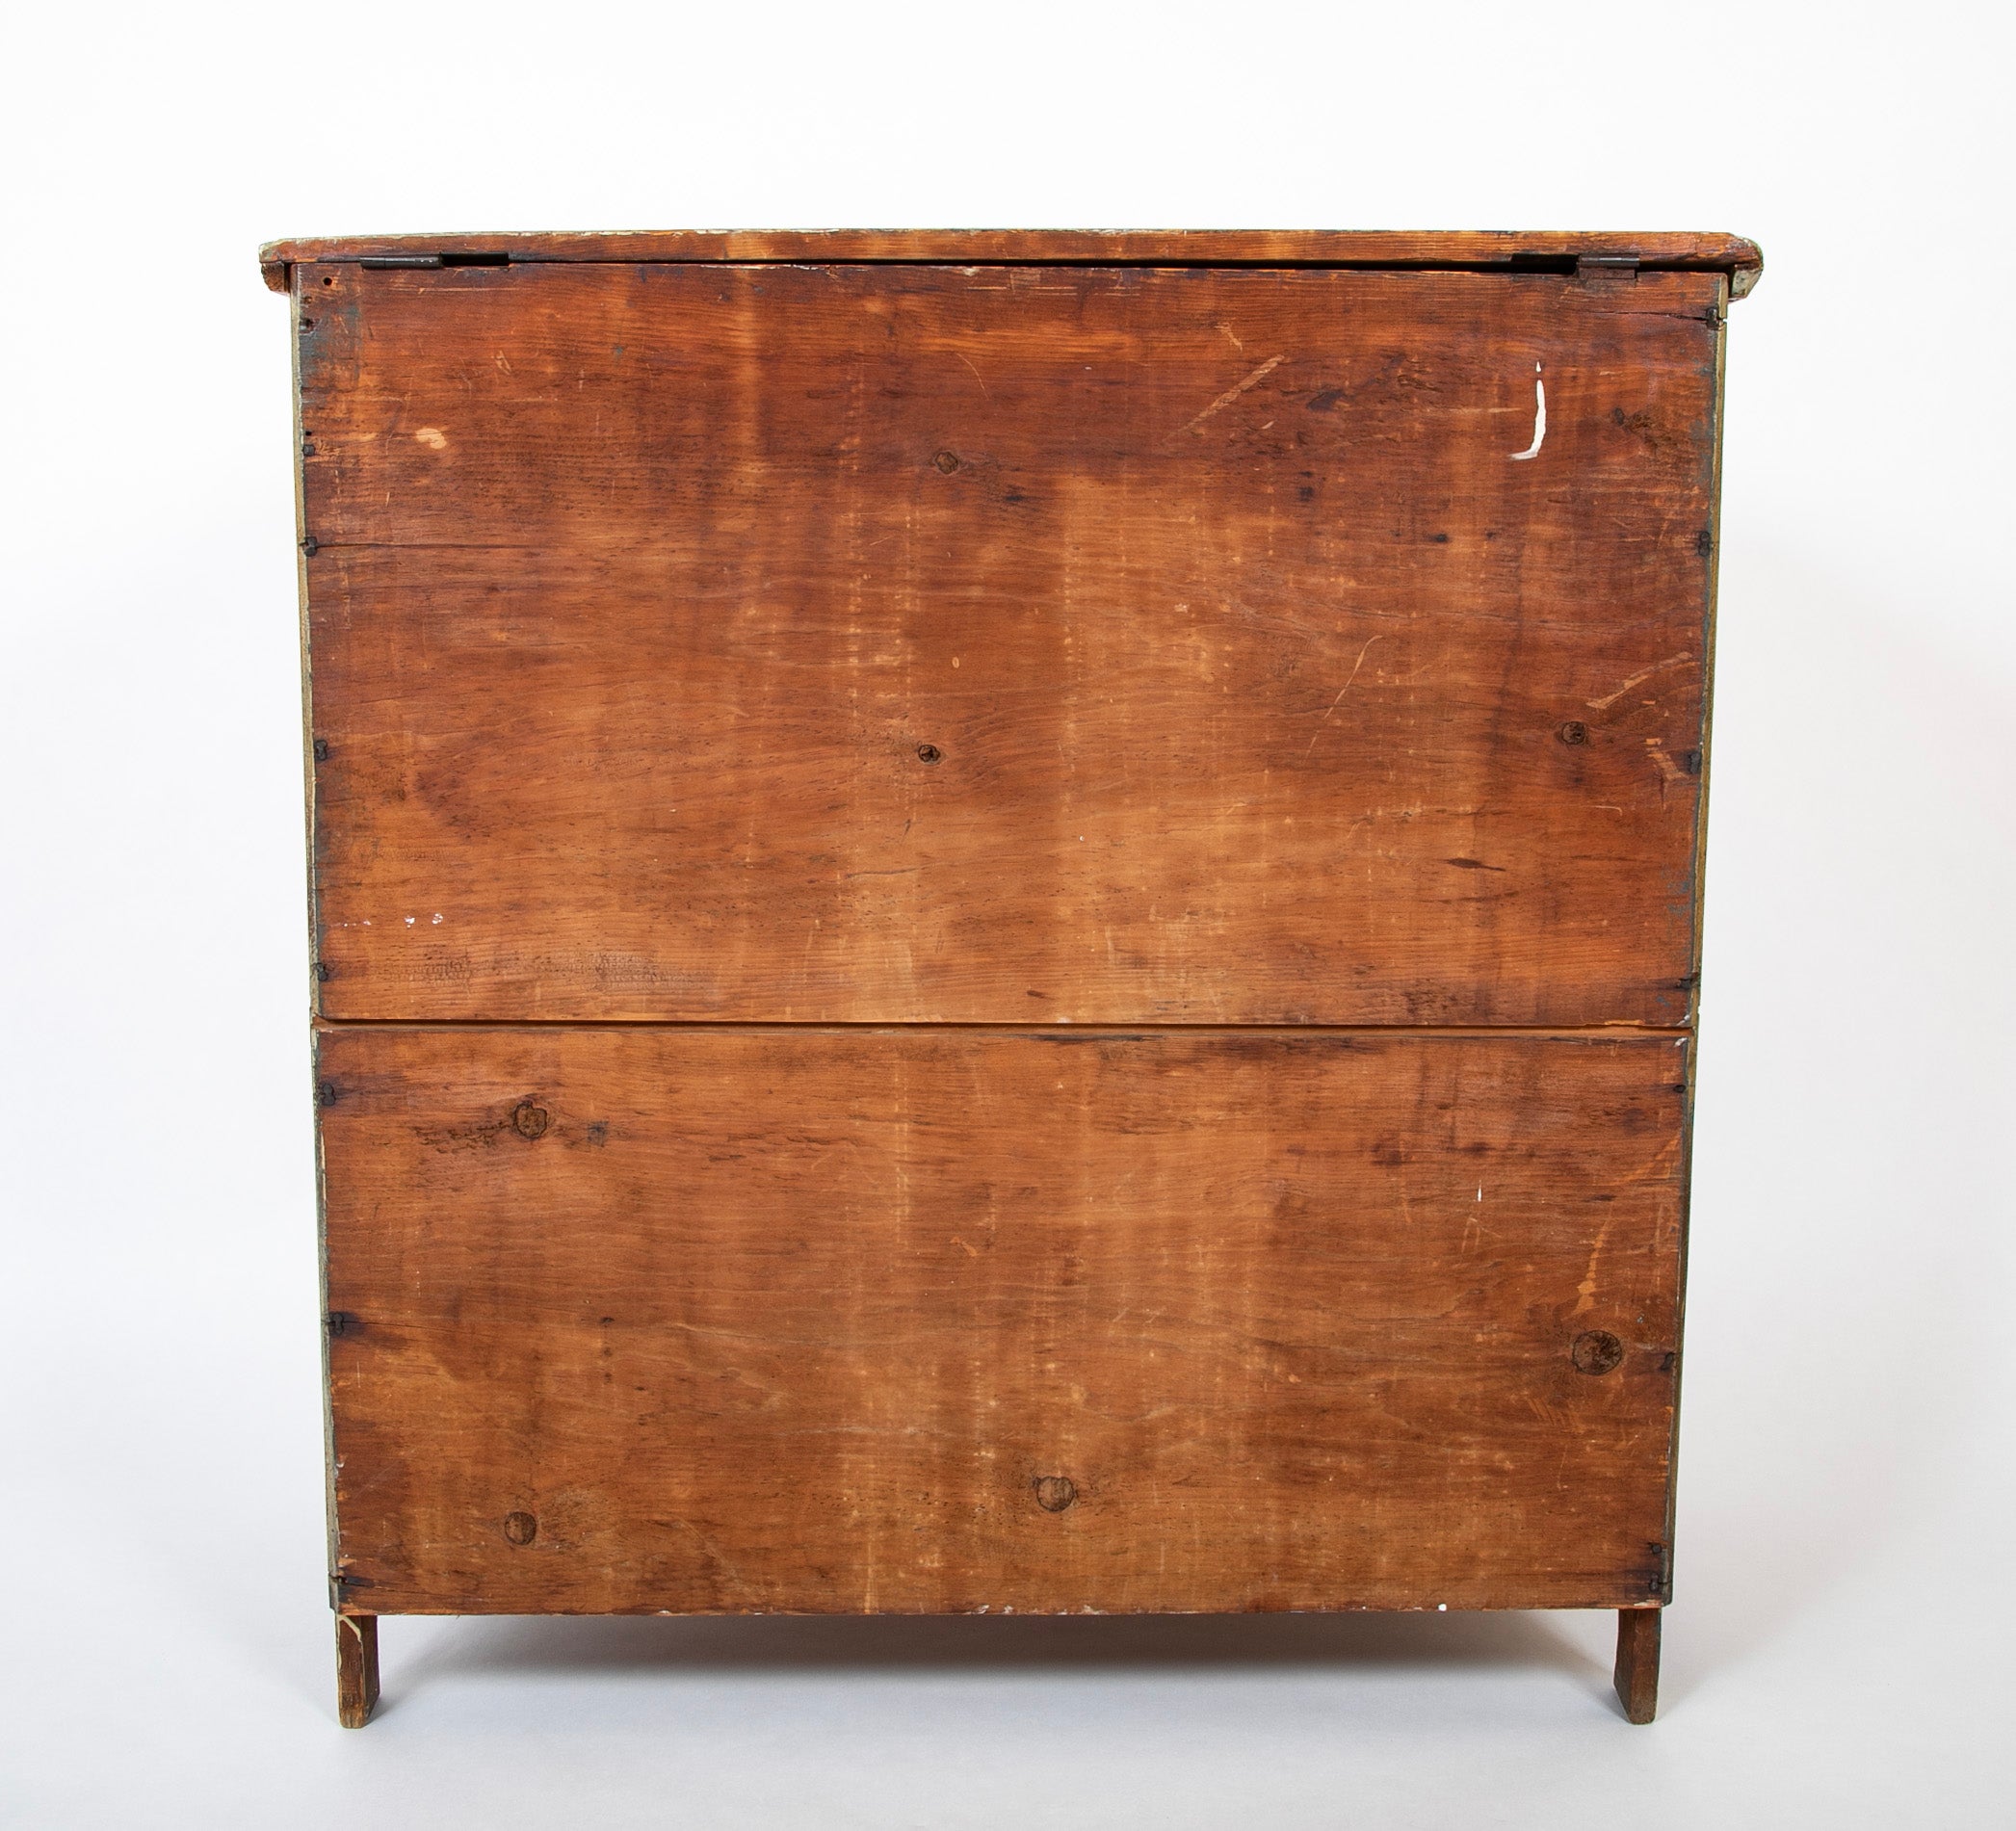 Early 19th Century Vermont Painted Pine Blanket Chest